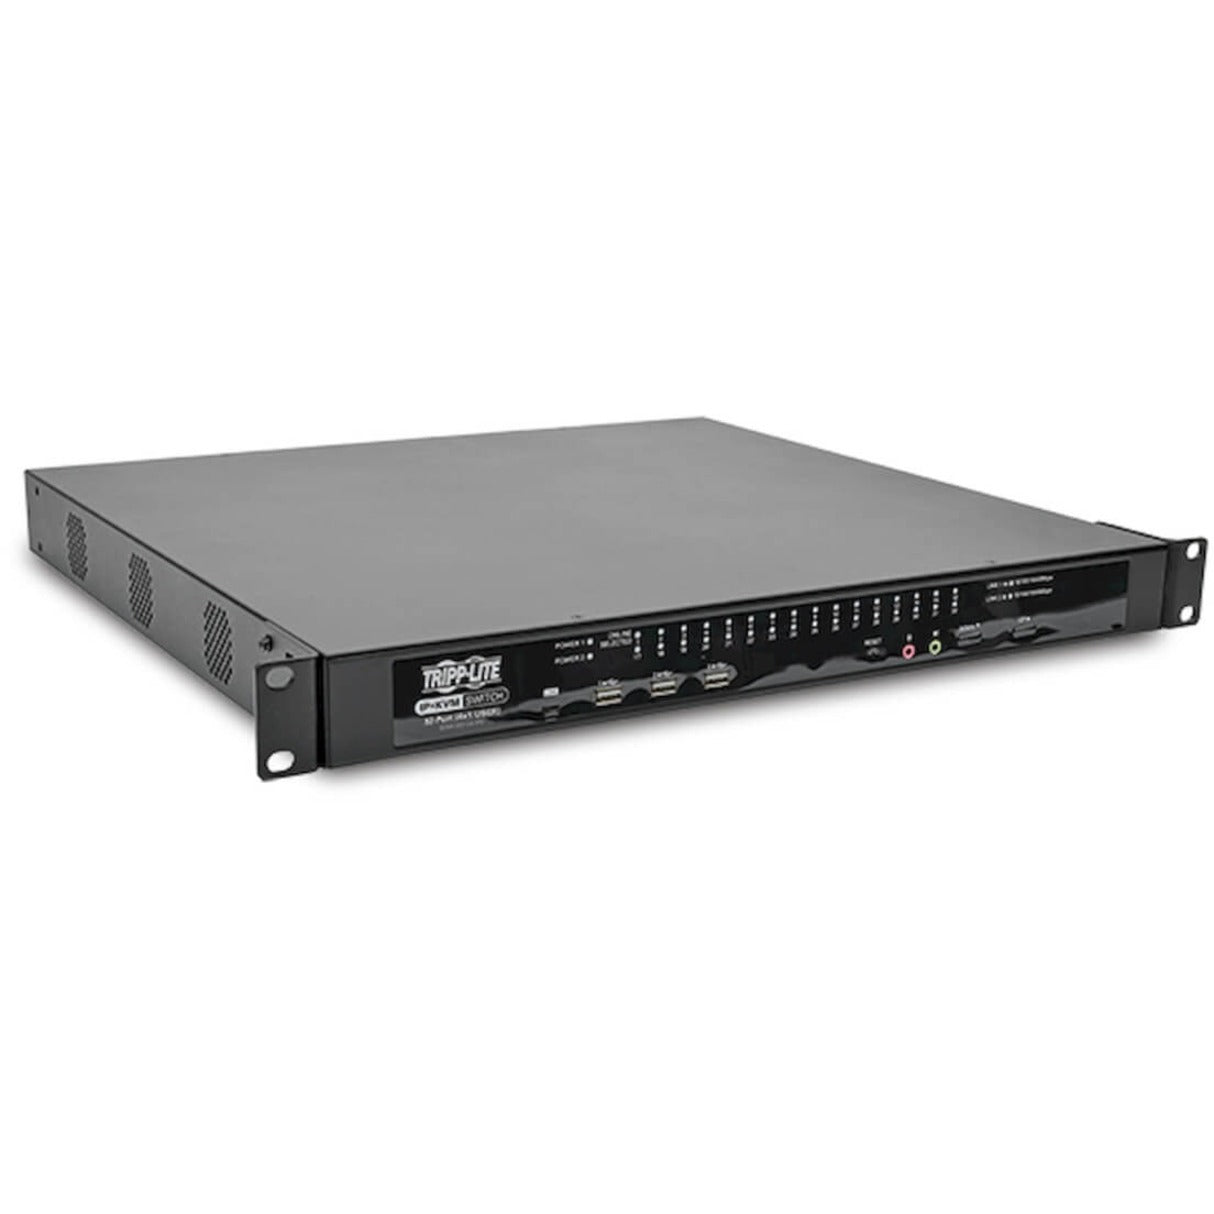 Tripp Lite B064-032-04-IPG NetDirector KVM Switchbox, 32 Computers Supported, 1 Local User, 4 Remote Users